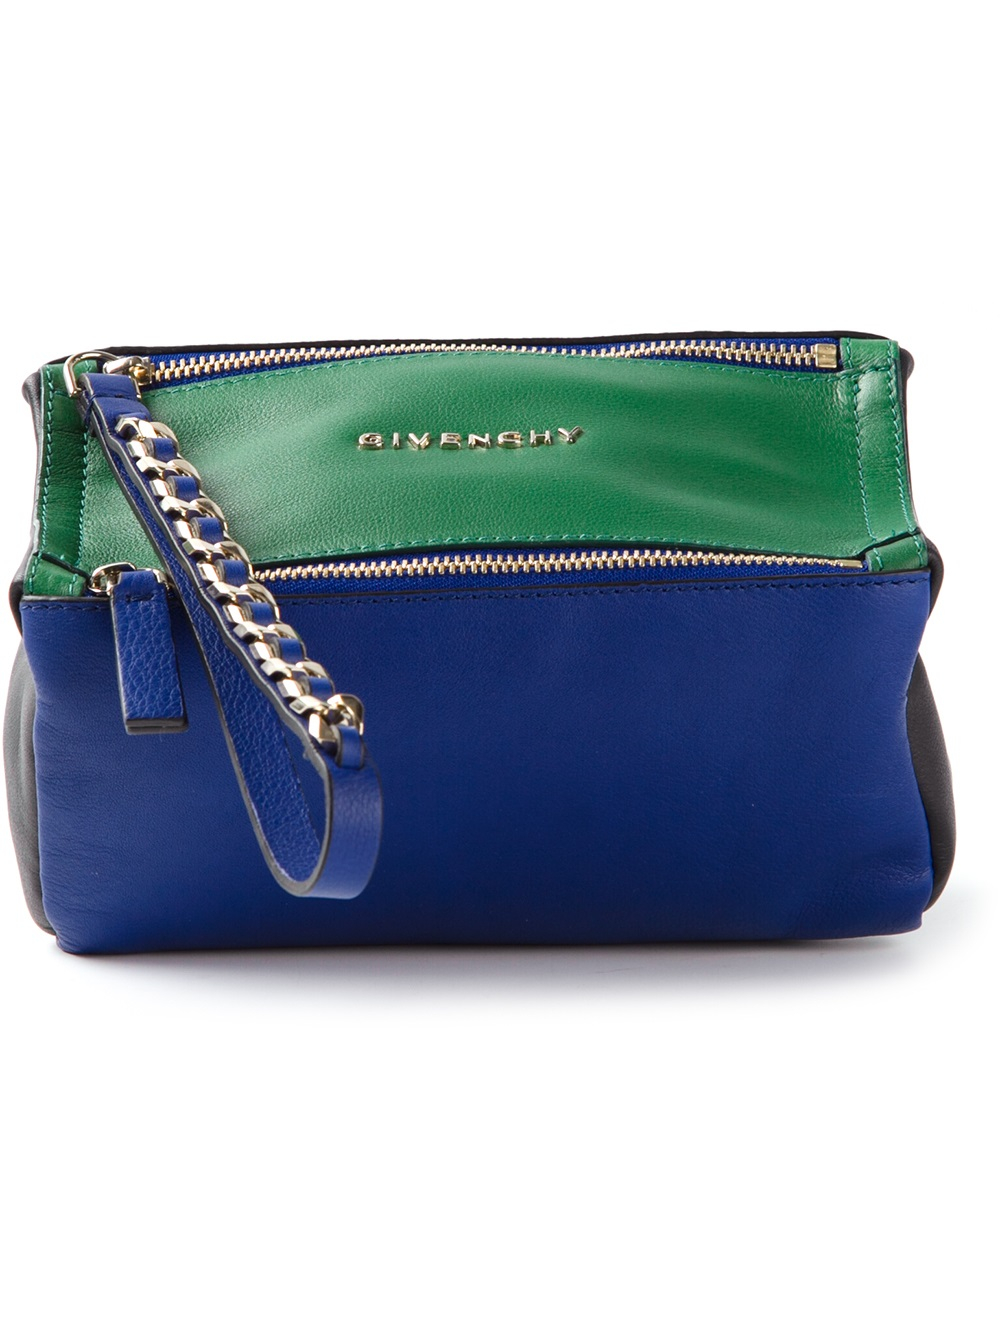 Lyst - Givenchy Pandora Wrist Pouch in Blue